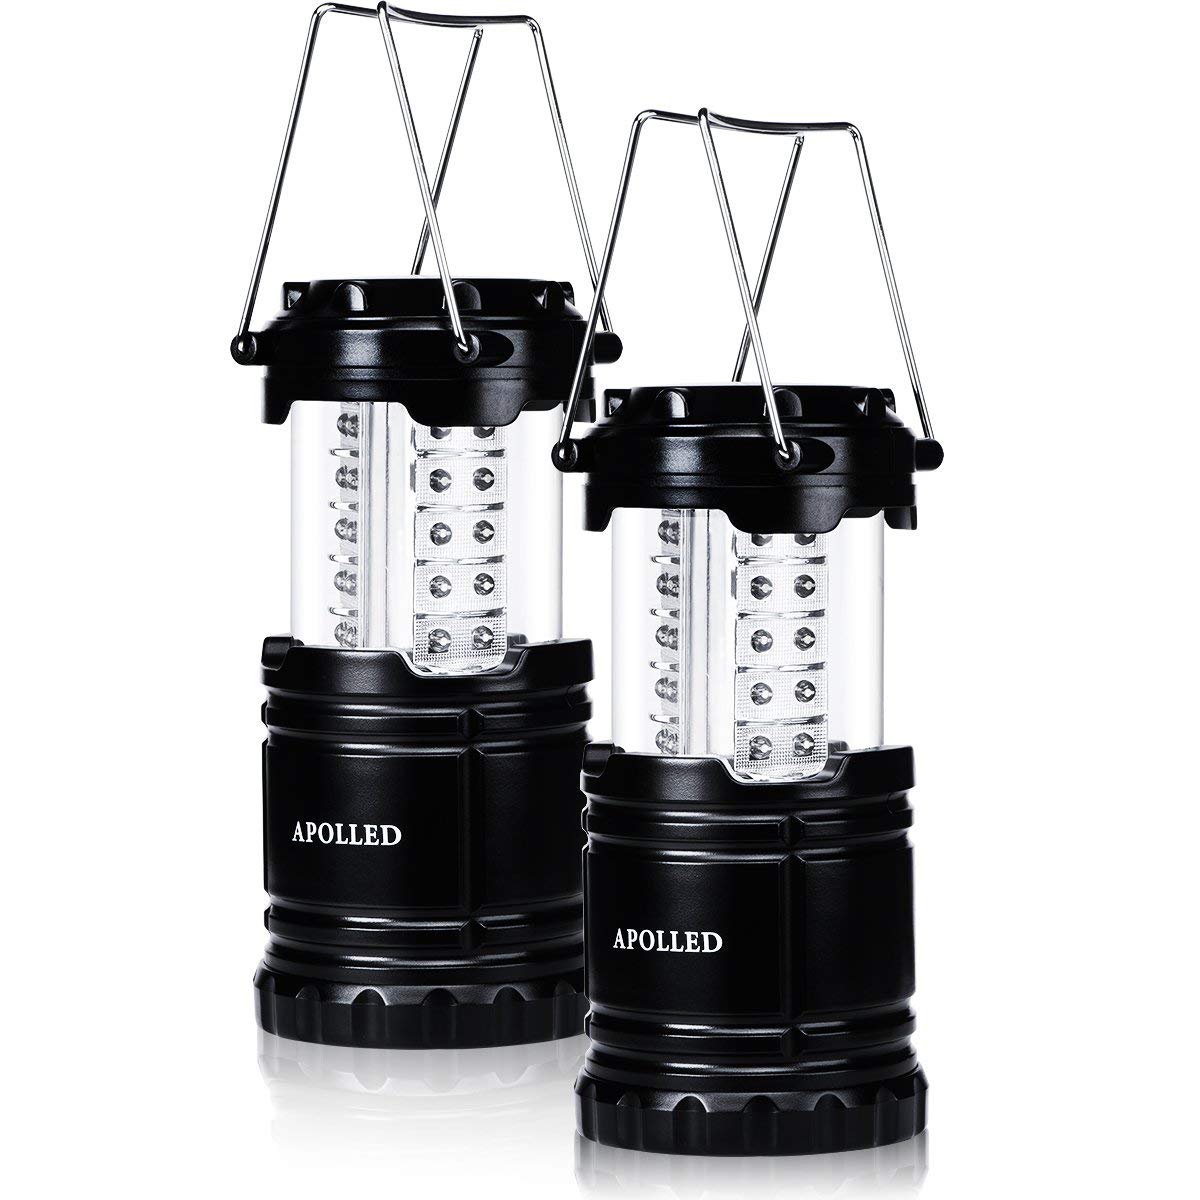 Apolled Camping LED Collapsible Lantern 2 Pack ONLY $7.99!